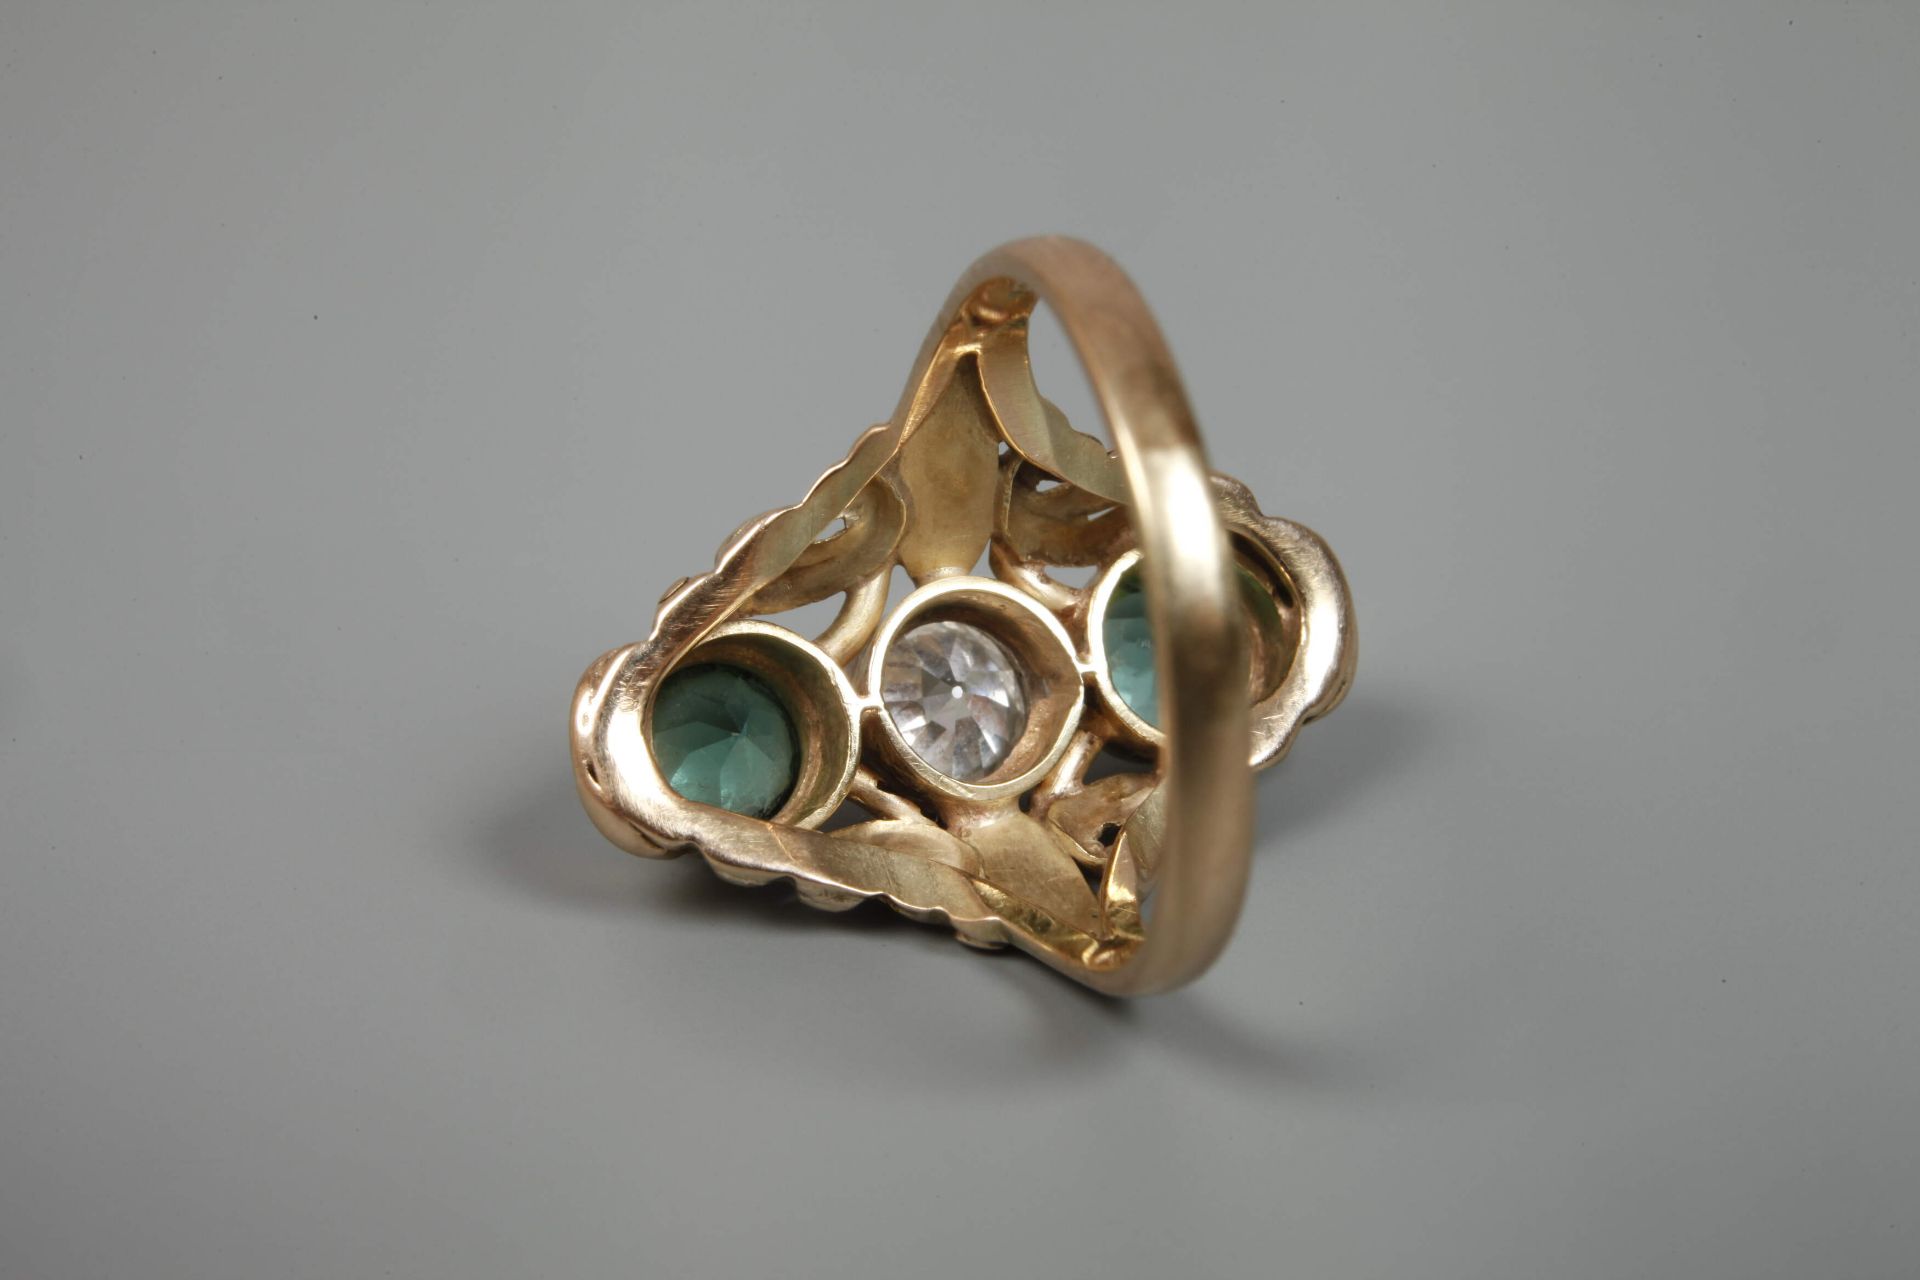 Lady's ring with tourmalines and diamond - Image 2 of 3